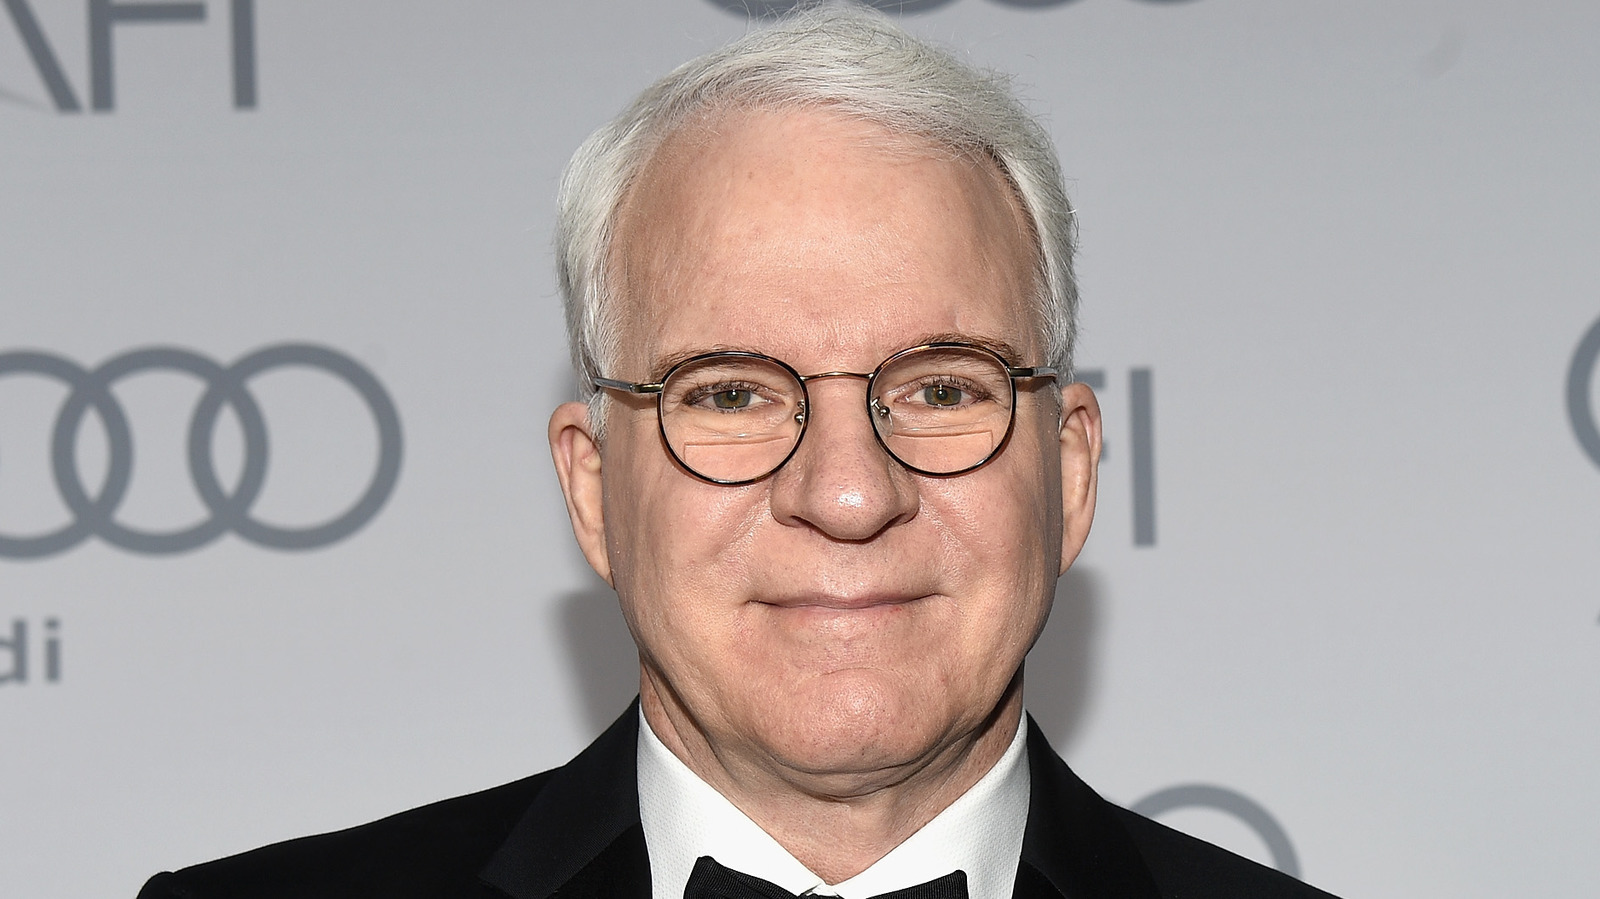 Greatest Hollywood Comedians of All Time-Steve Martin